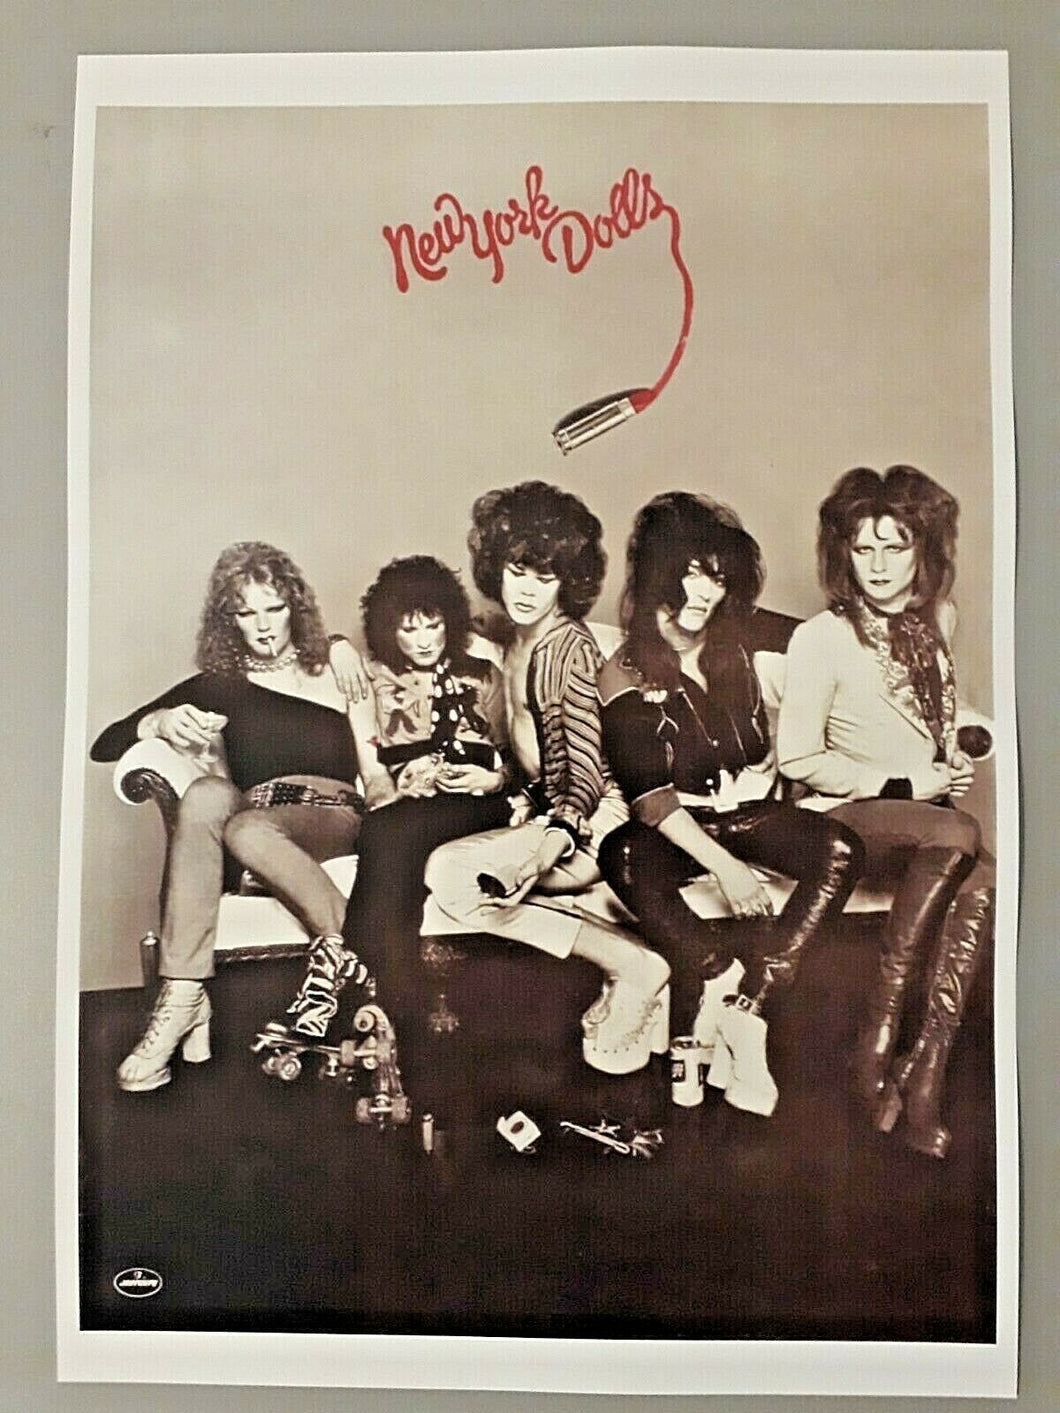 New York Dolls poster - First Album release 1973 promotional A3 size reprint - Original Music and Movie Posters for sale from Bamalama - Online Poster Store UK London